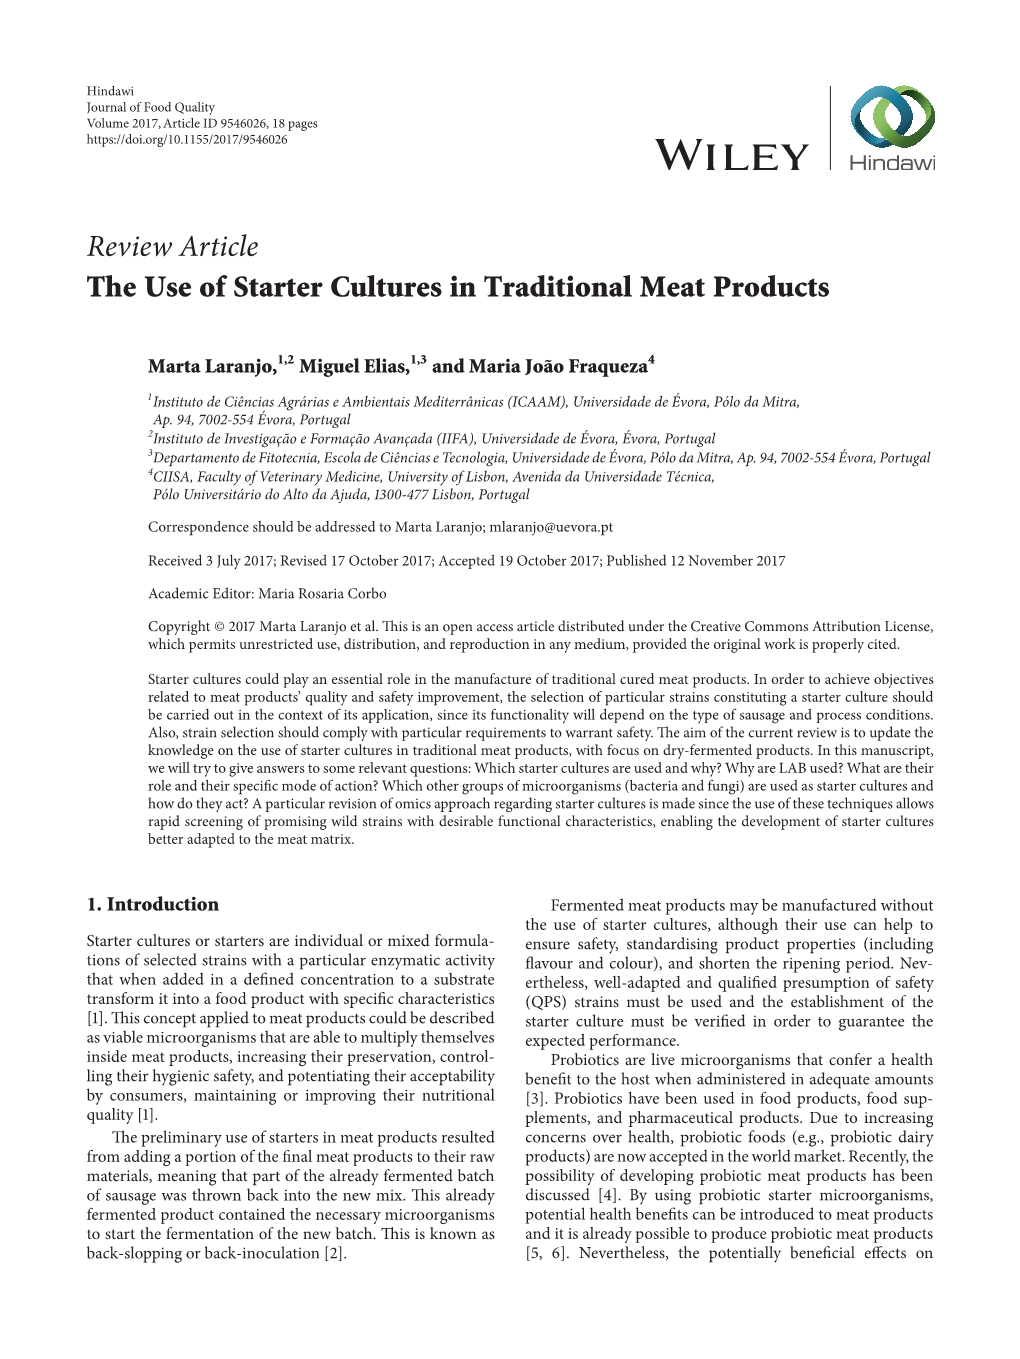 The Use of Starter Cultures in Traditional Meat Products